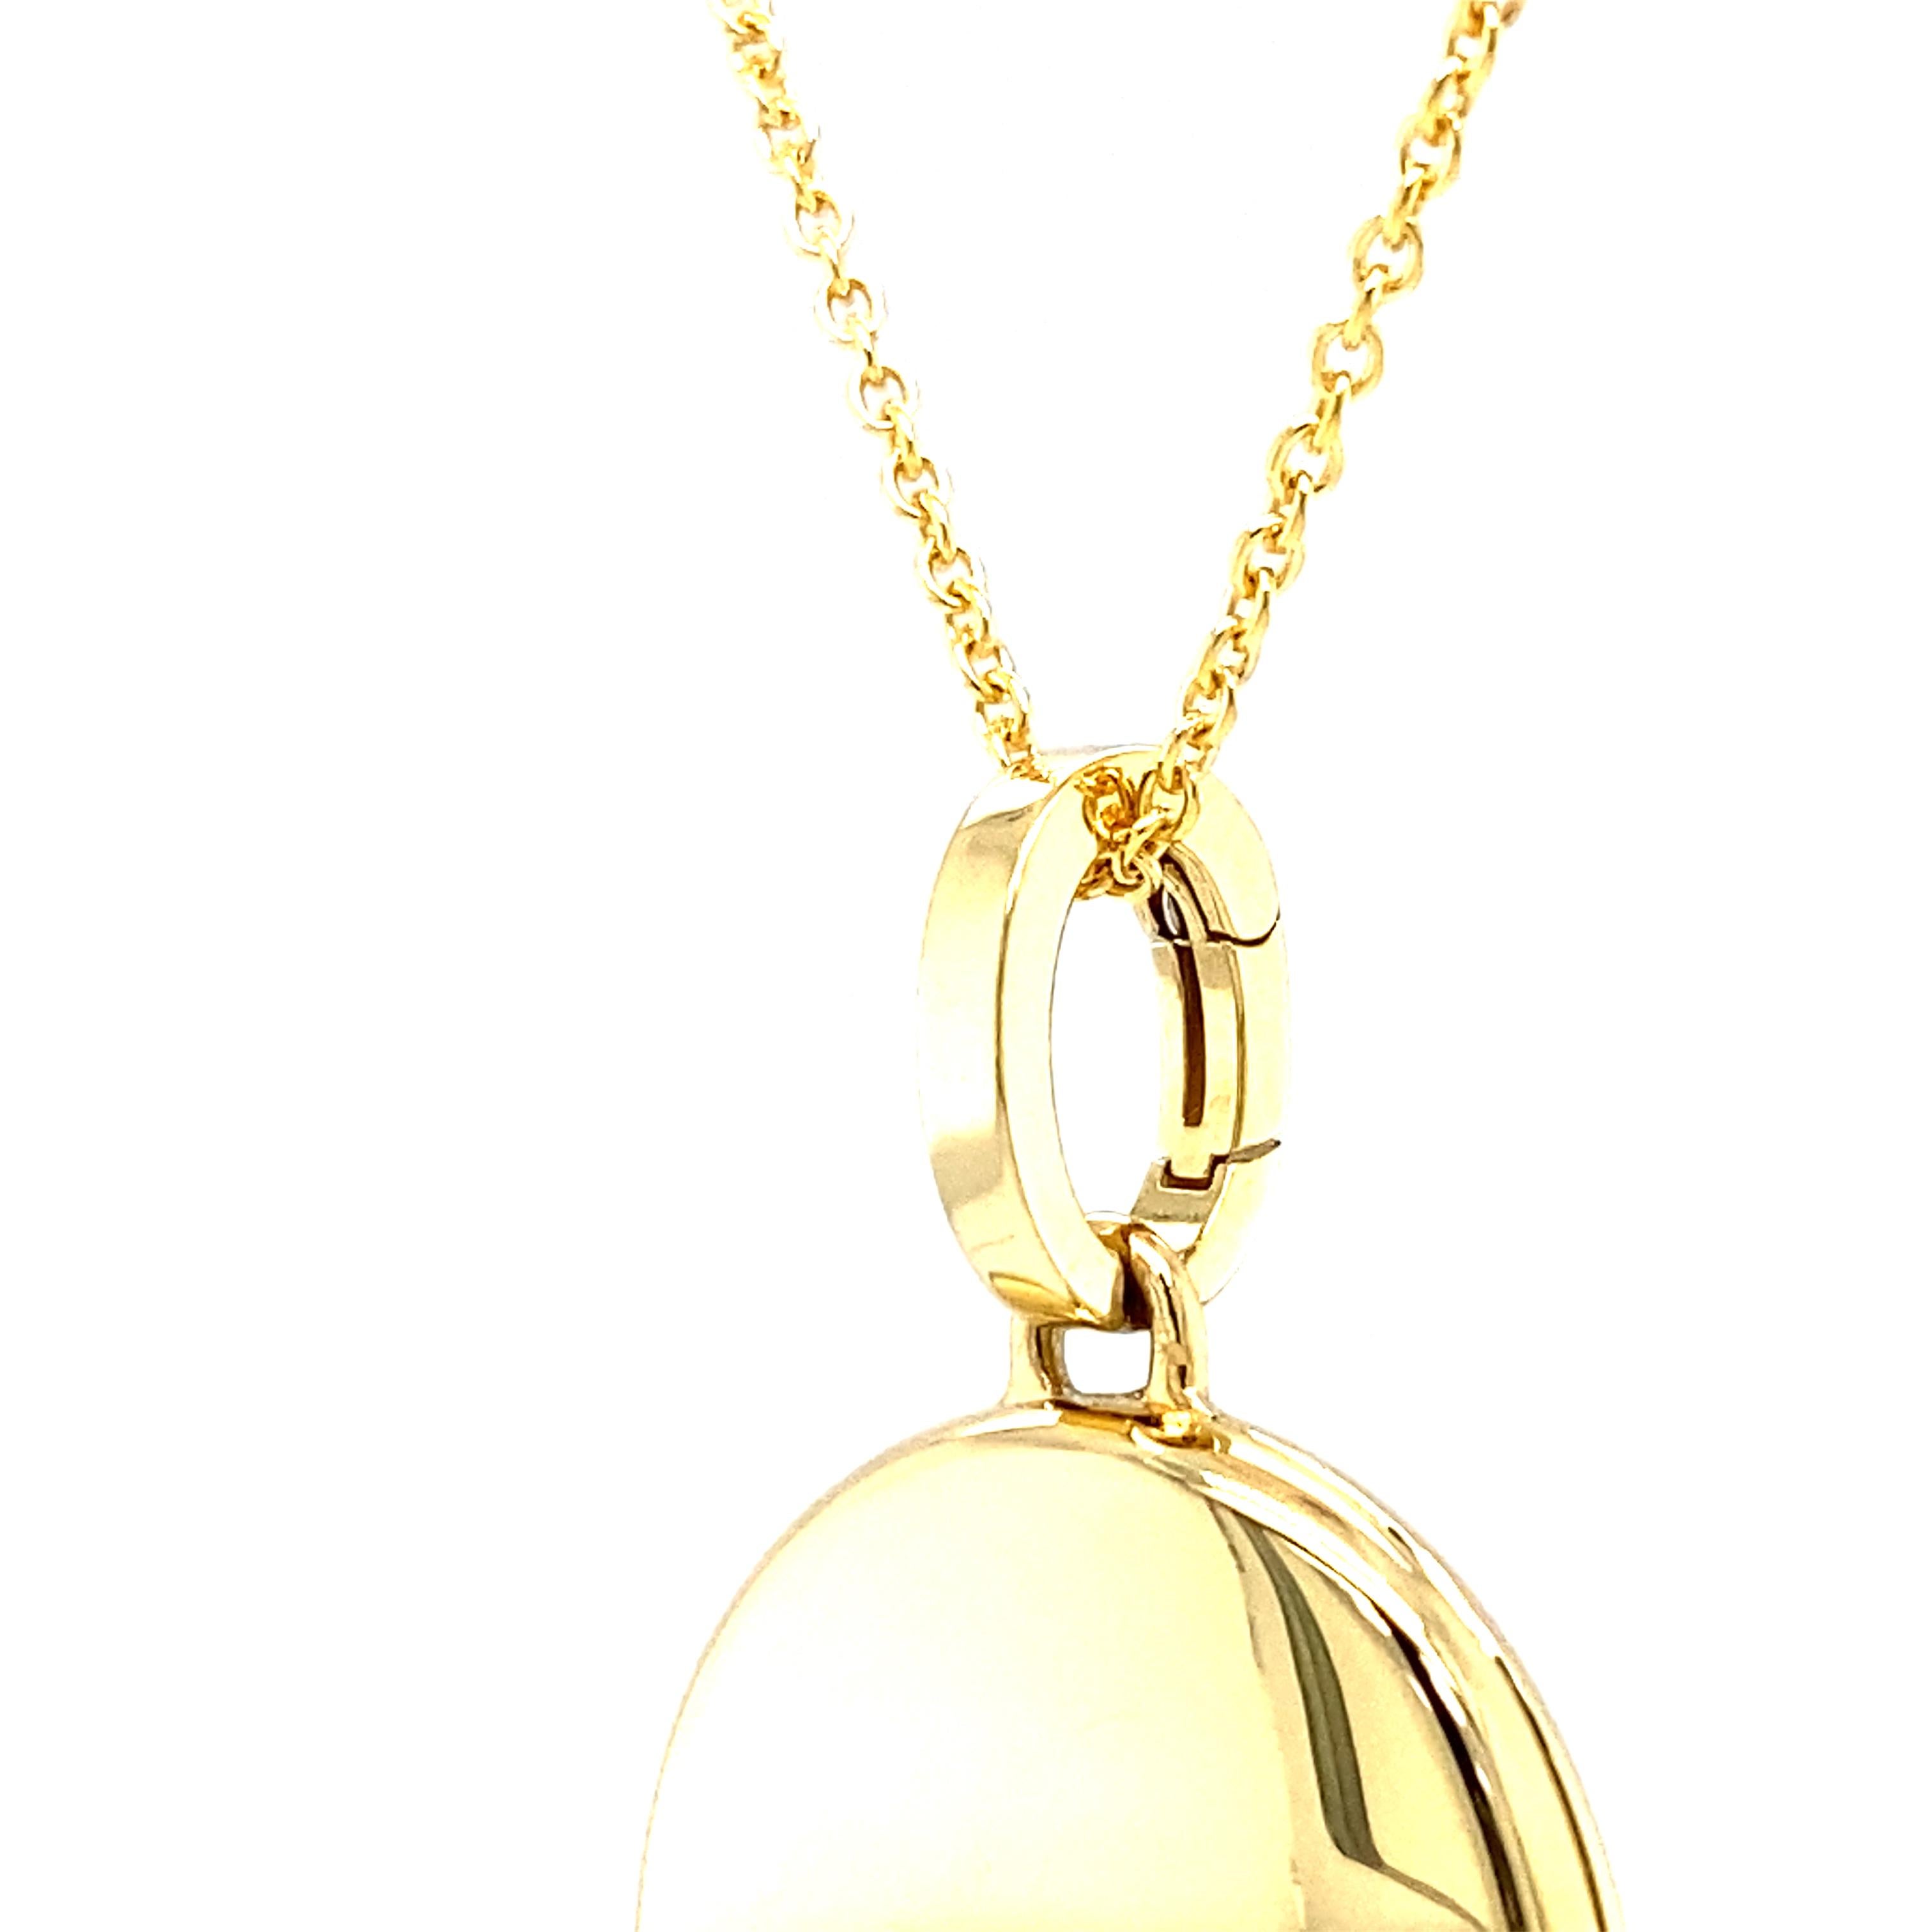 Customizable Oval Polished Hallmark Pendant Locket 18k Yellow Gold 23 mm x 20 mm In New Condition For Sale In Pforzheim, DE